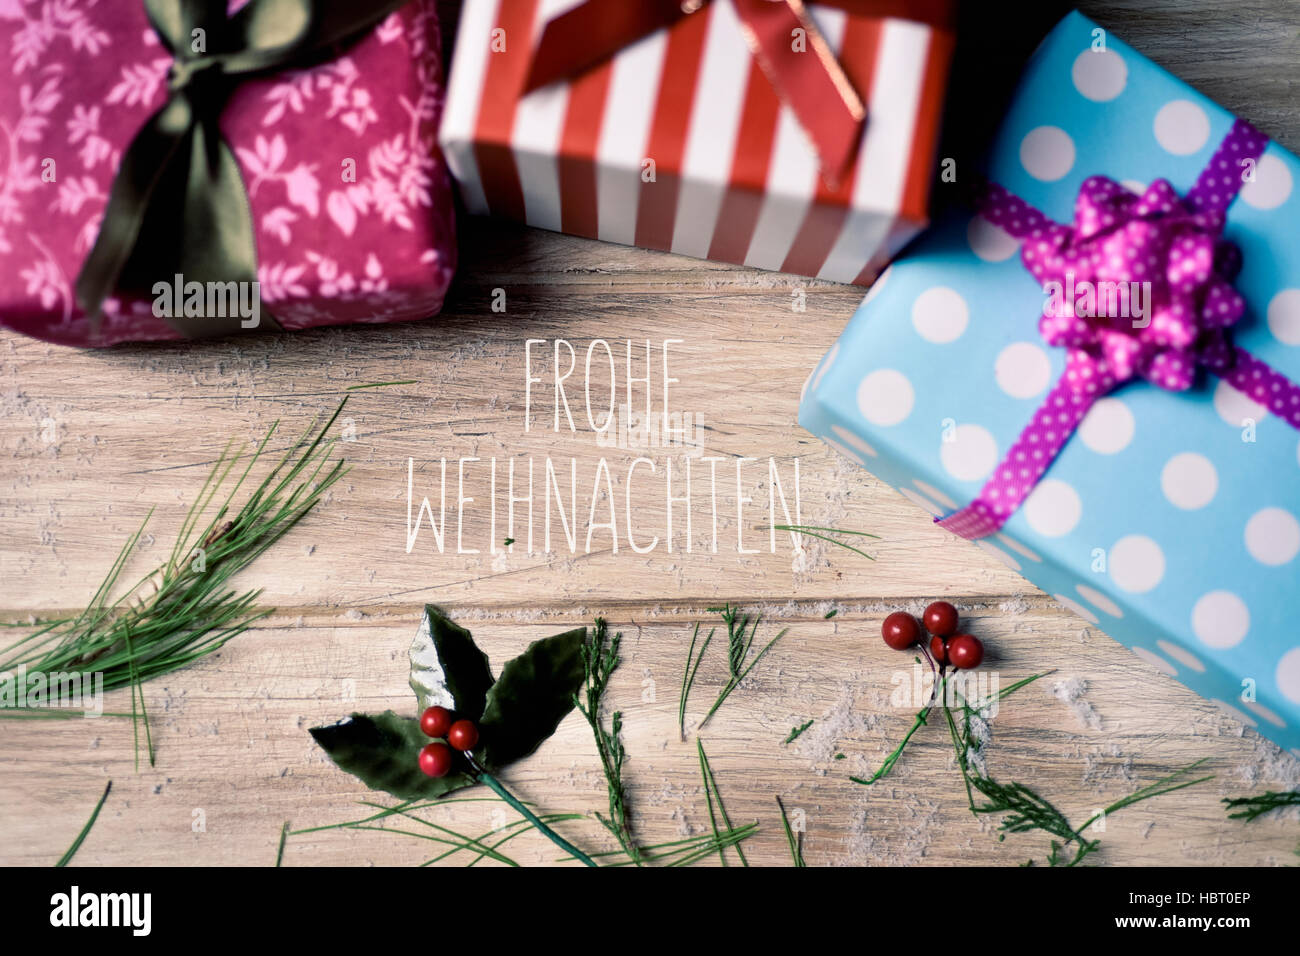 the text frohe weihnachten, merry christmas in german and some gifts wrapped in different papers and tied with ribbons of different colors, and some n Stock Photo